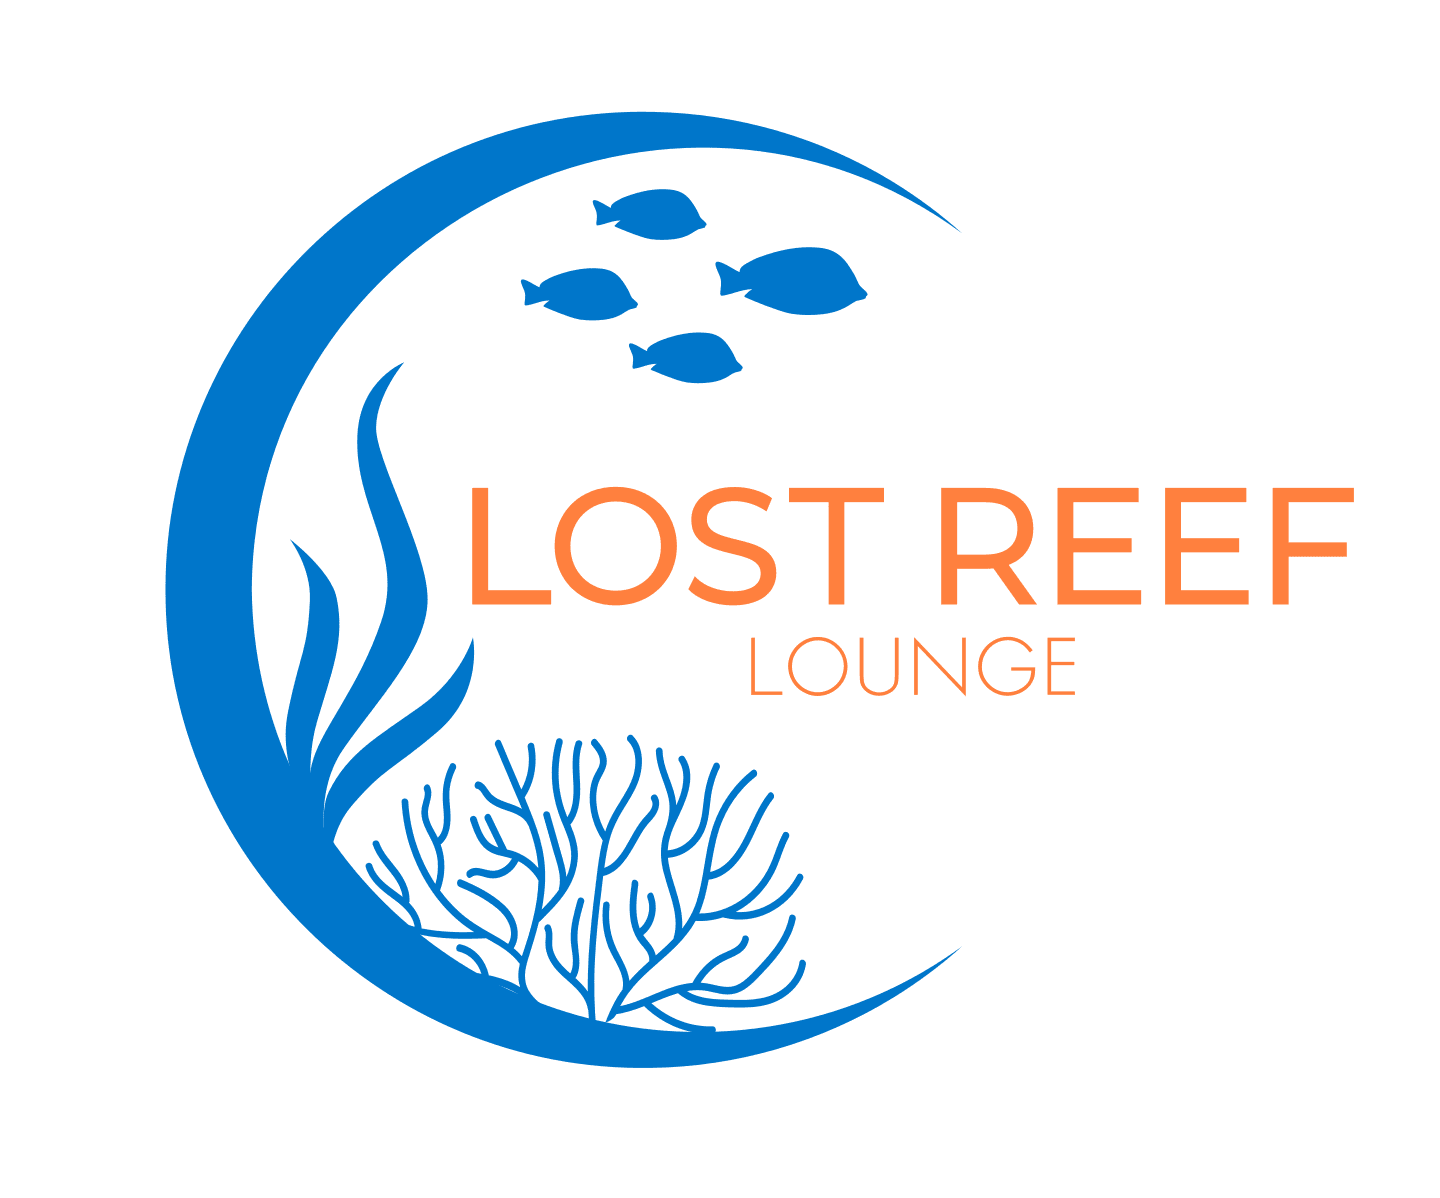 Lost Reefe Lounge 